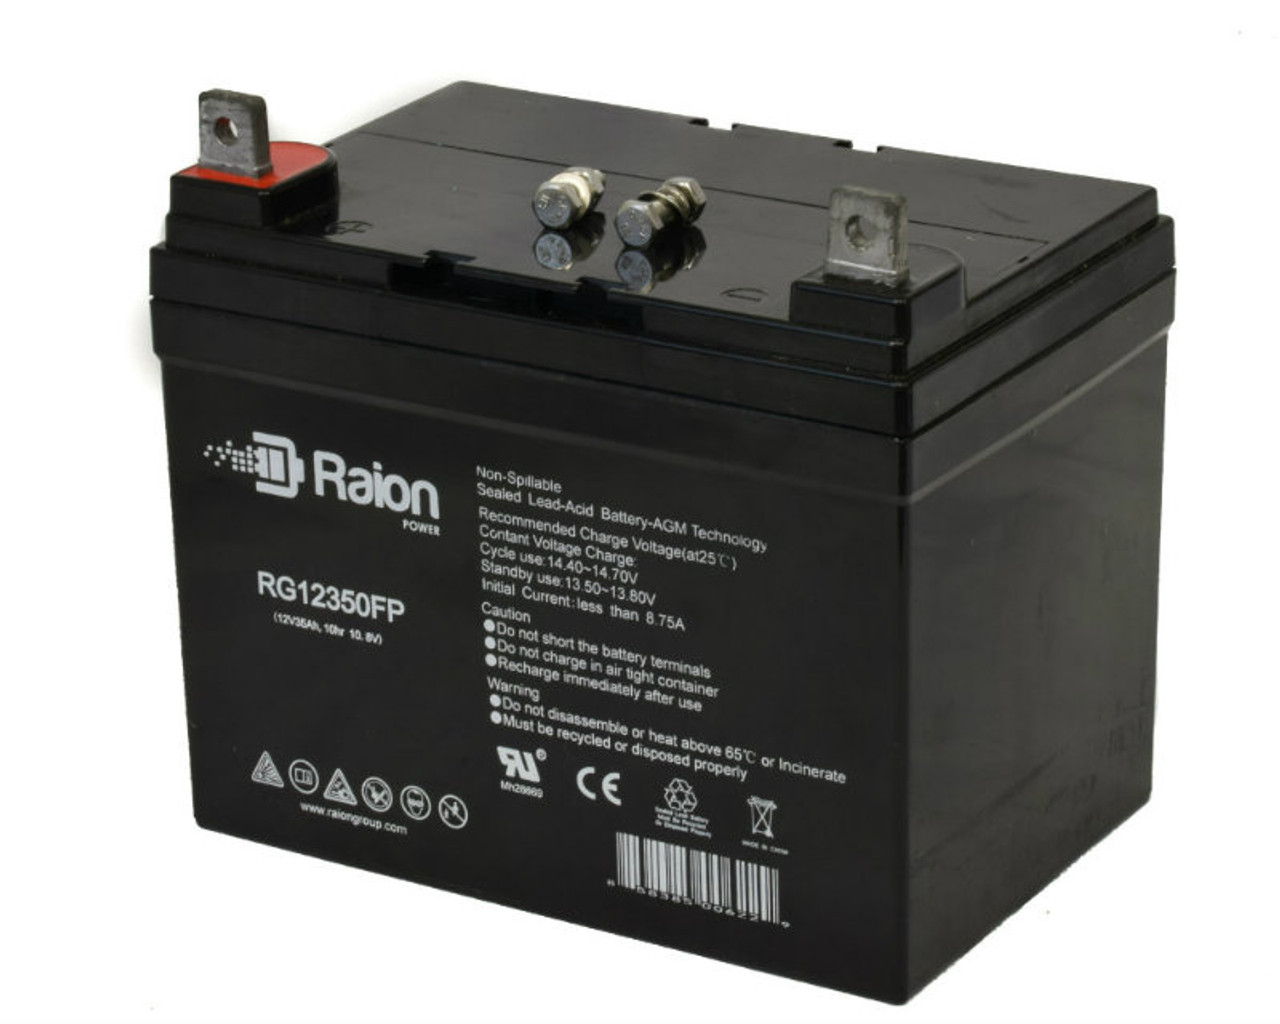 Raion Power Replacement 12V 35Ah RG12350FP Battery for Murray S1642